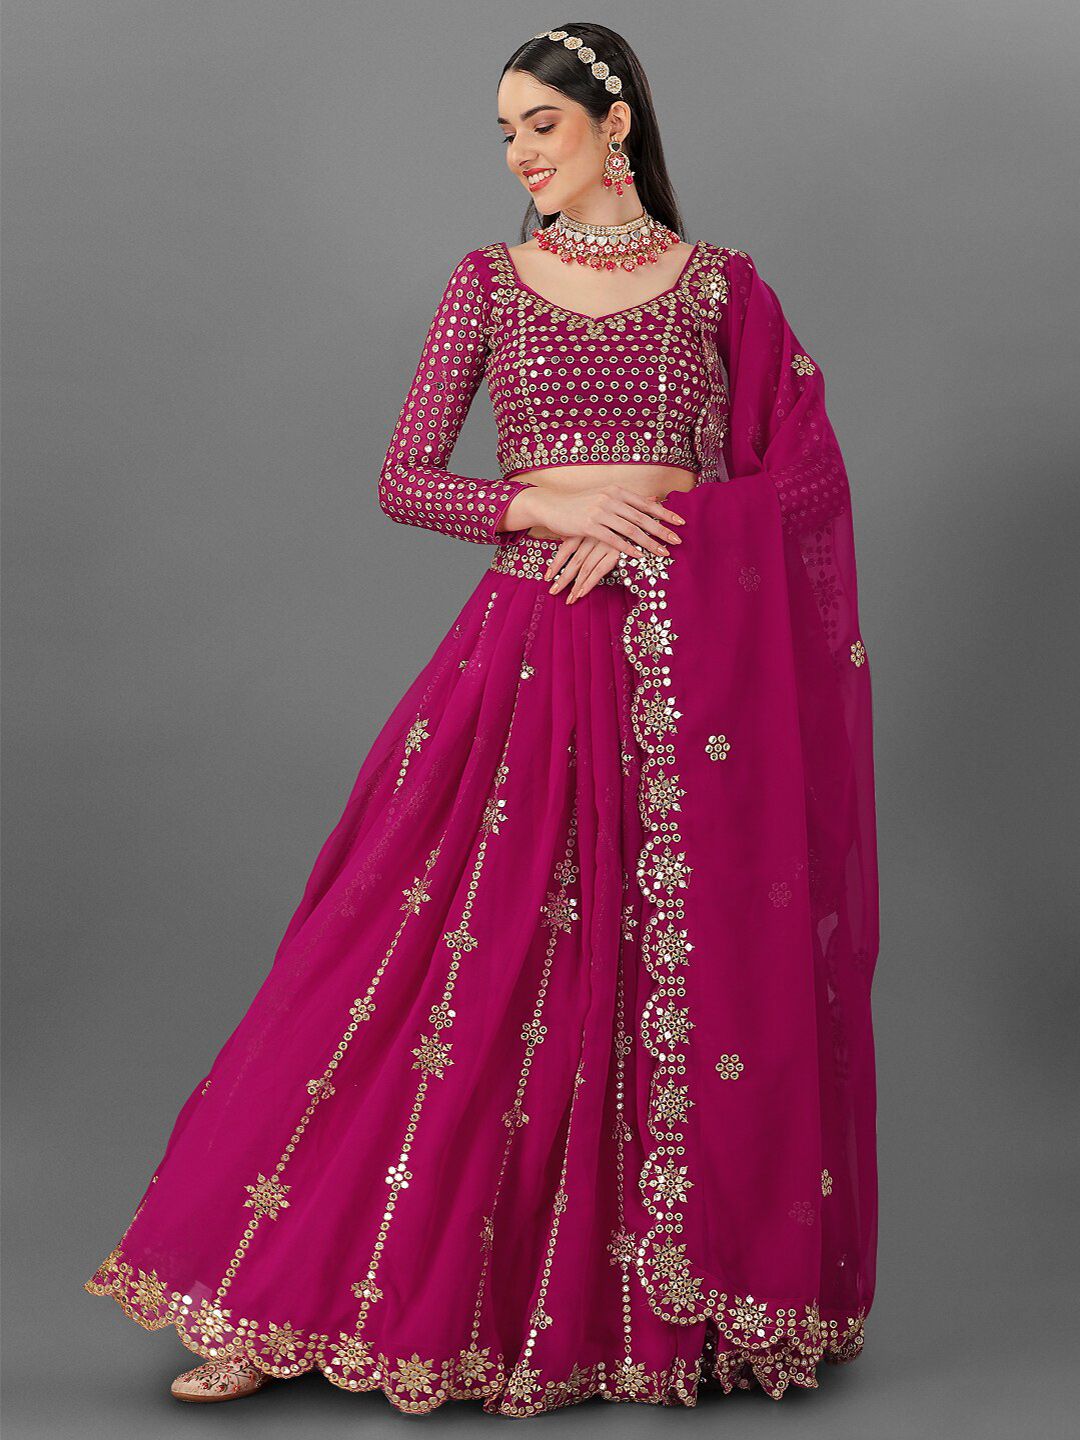 Angroop Embroidered Semi-Stitched Lehenga & Unstitched Blouse With Dupatta Price in India